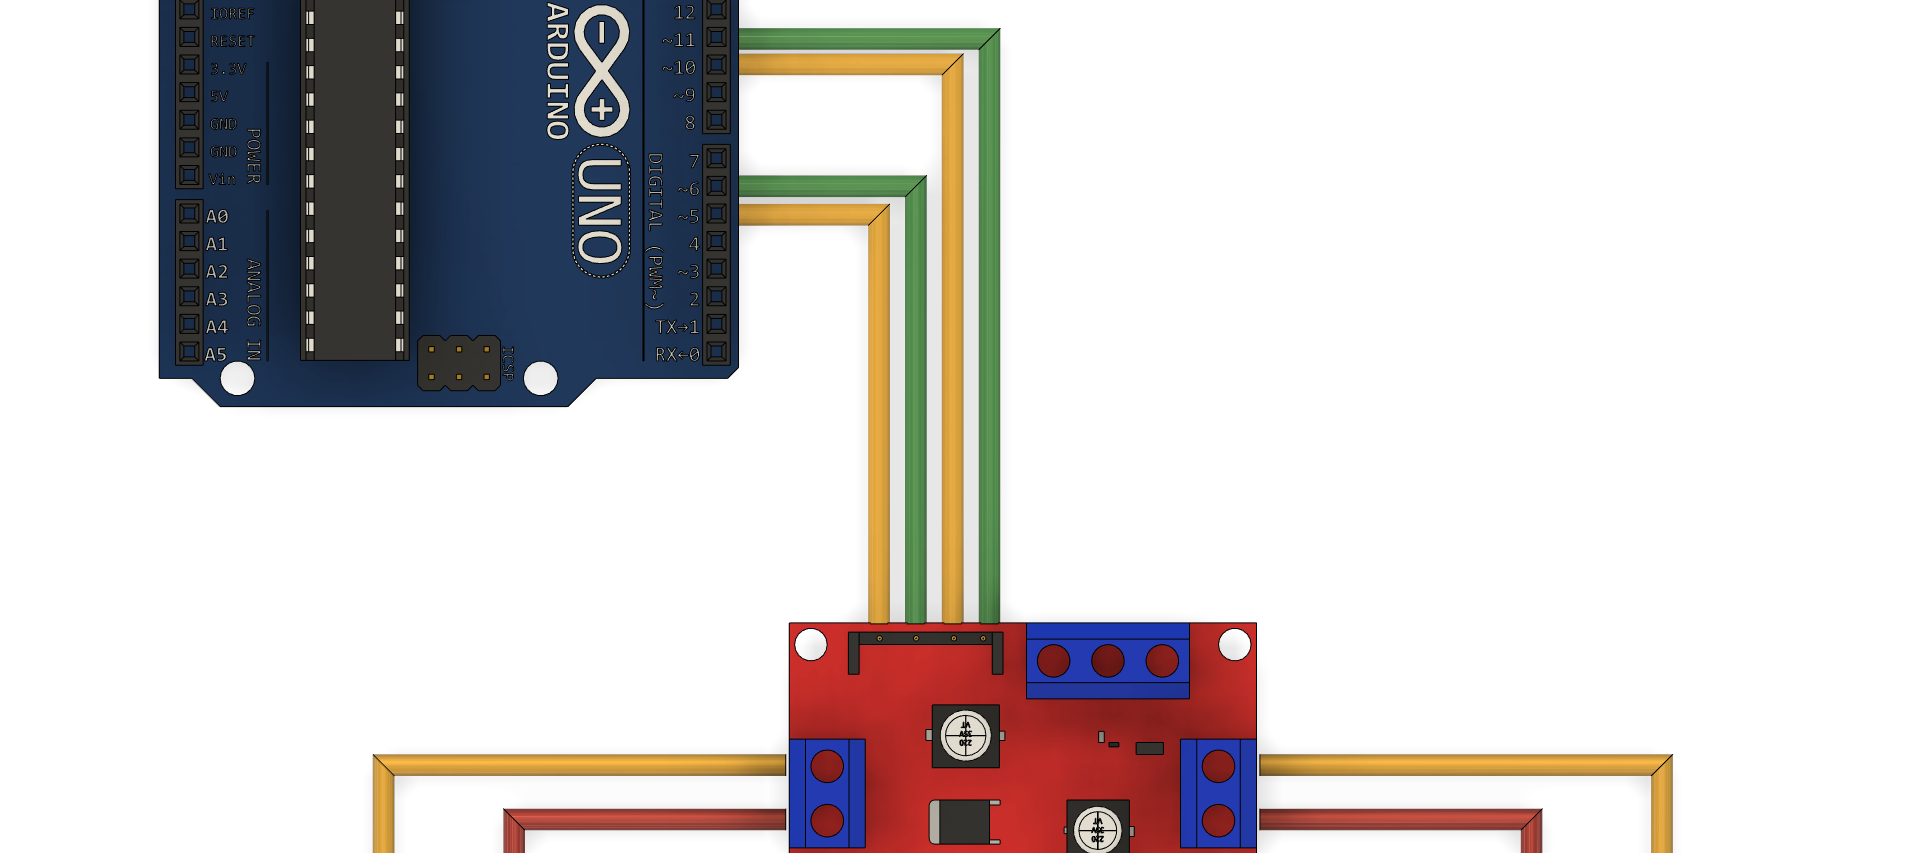 Connections between the motors and L298N motor drivers